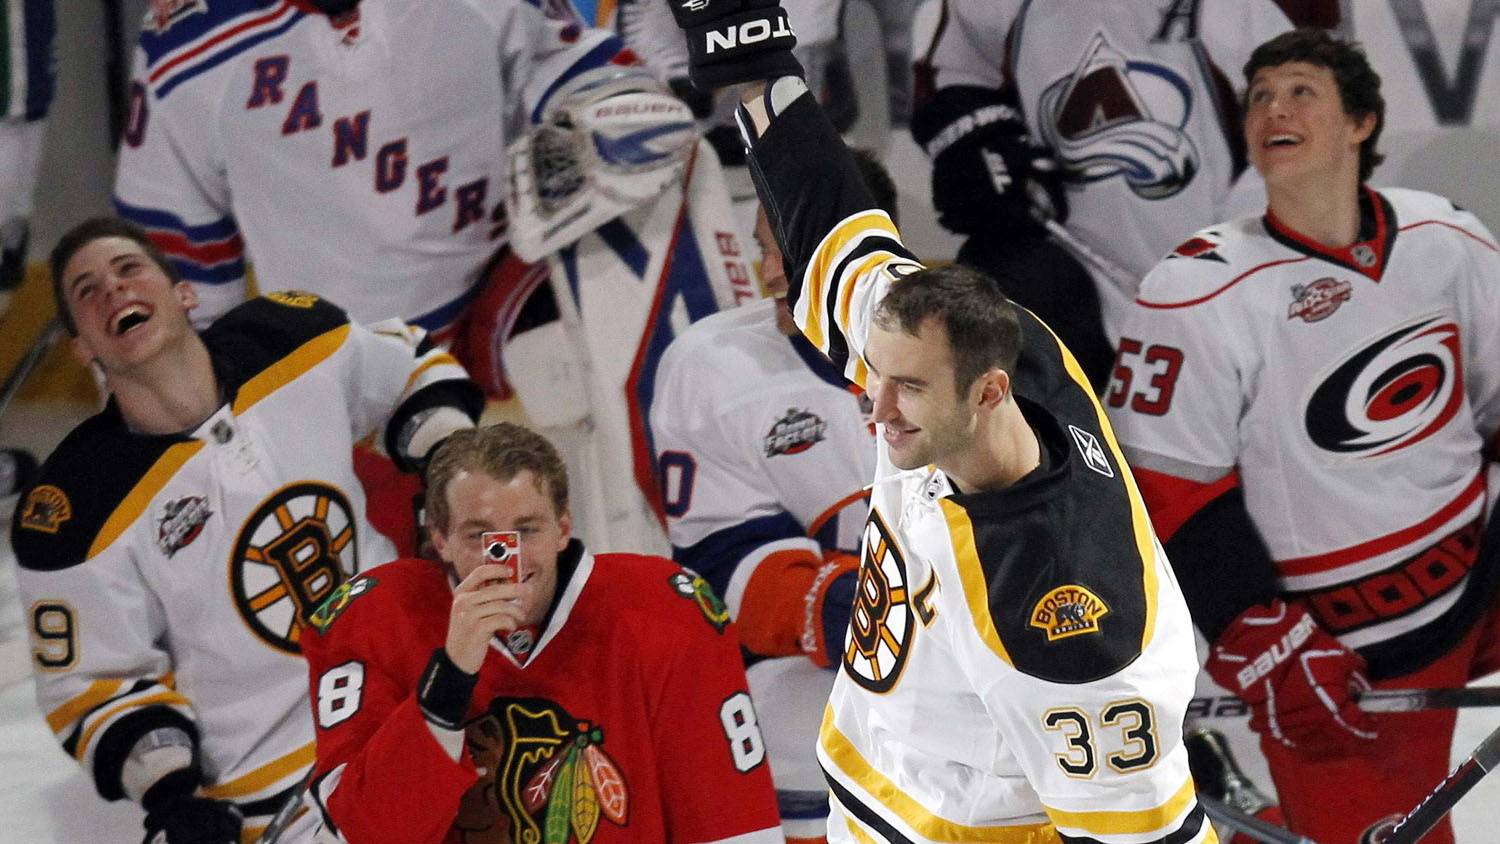 Bruins' Chara, Ovechkin have SuperSkills